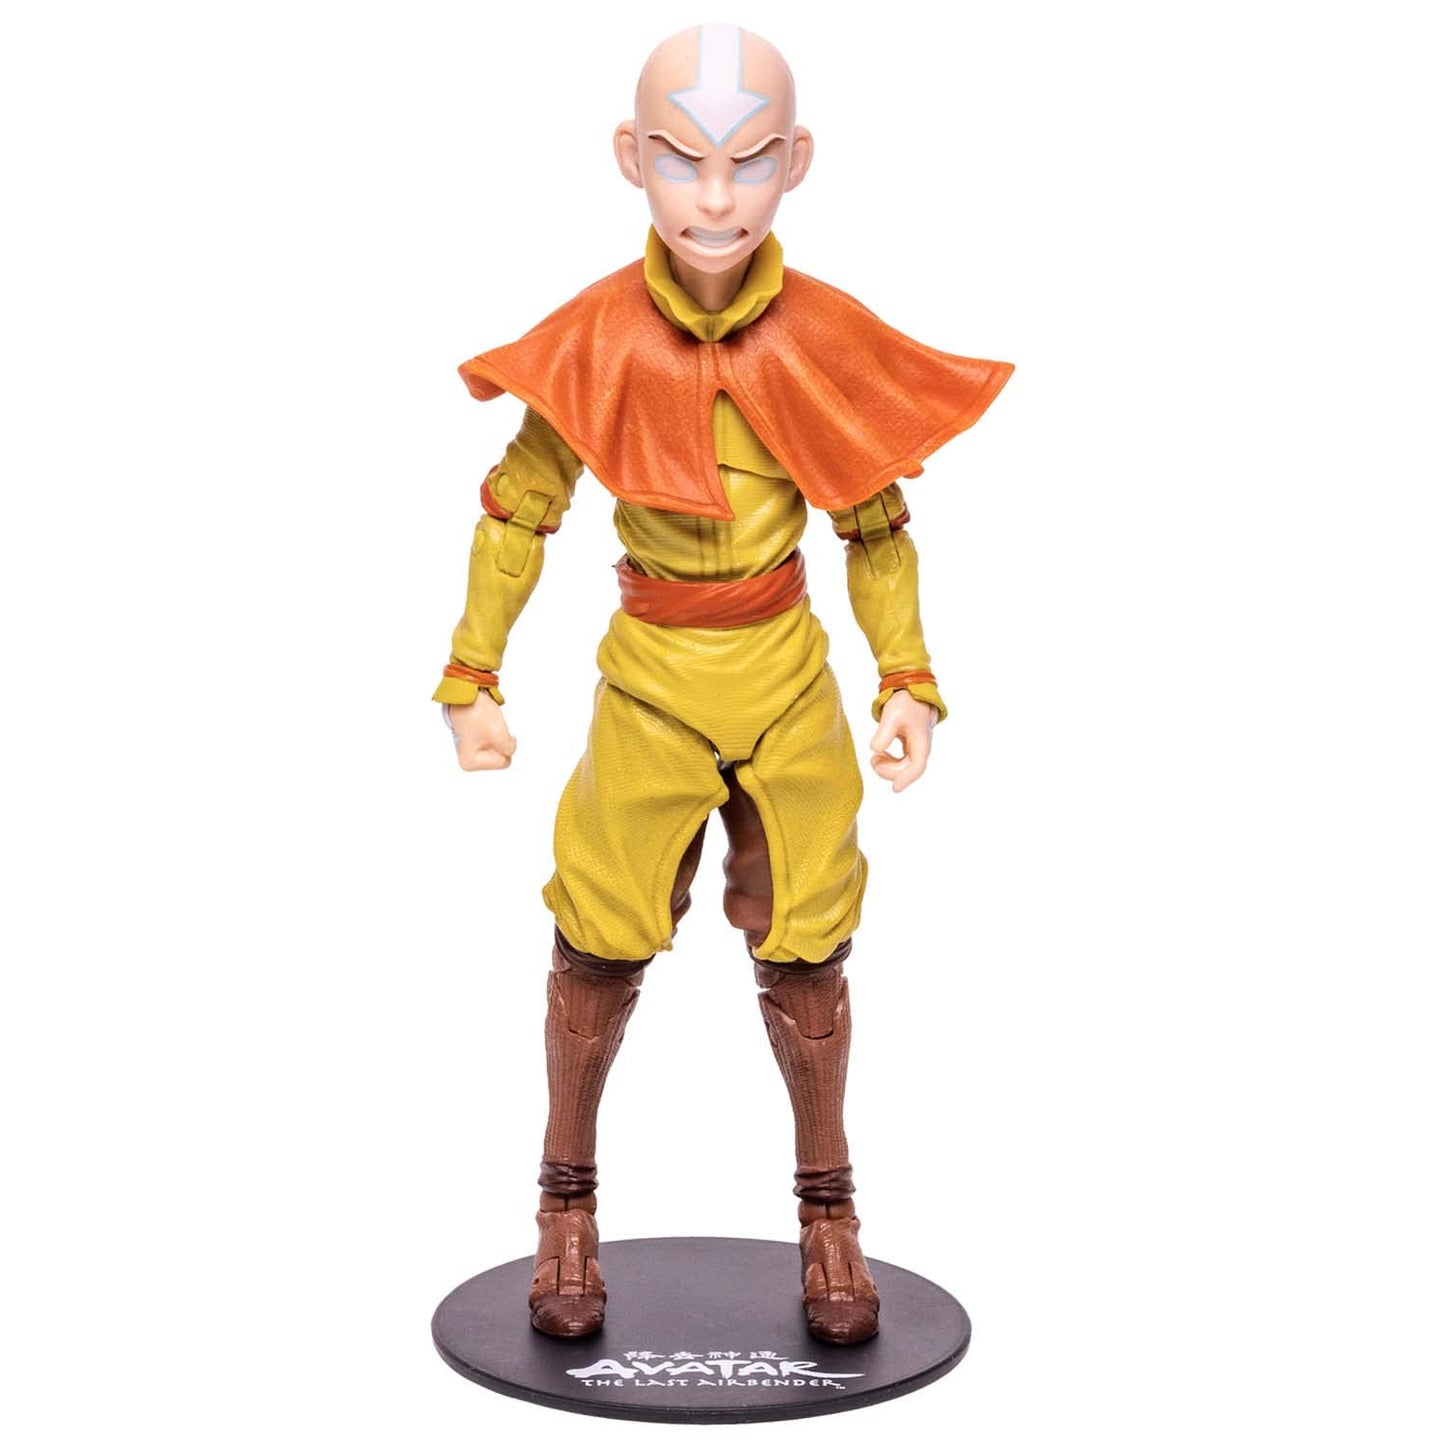 Aang in Avatar State (Avatar: The Last Airbender) Gold Label 7" Figure